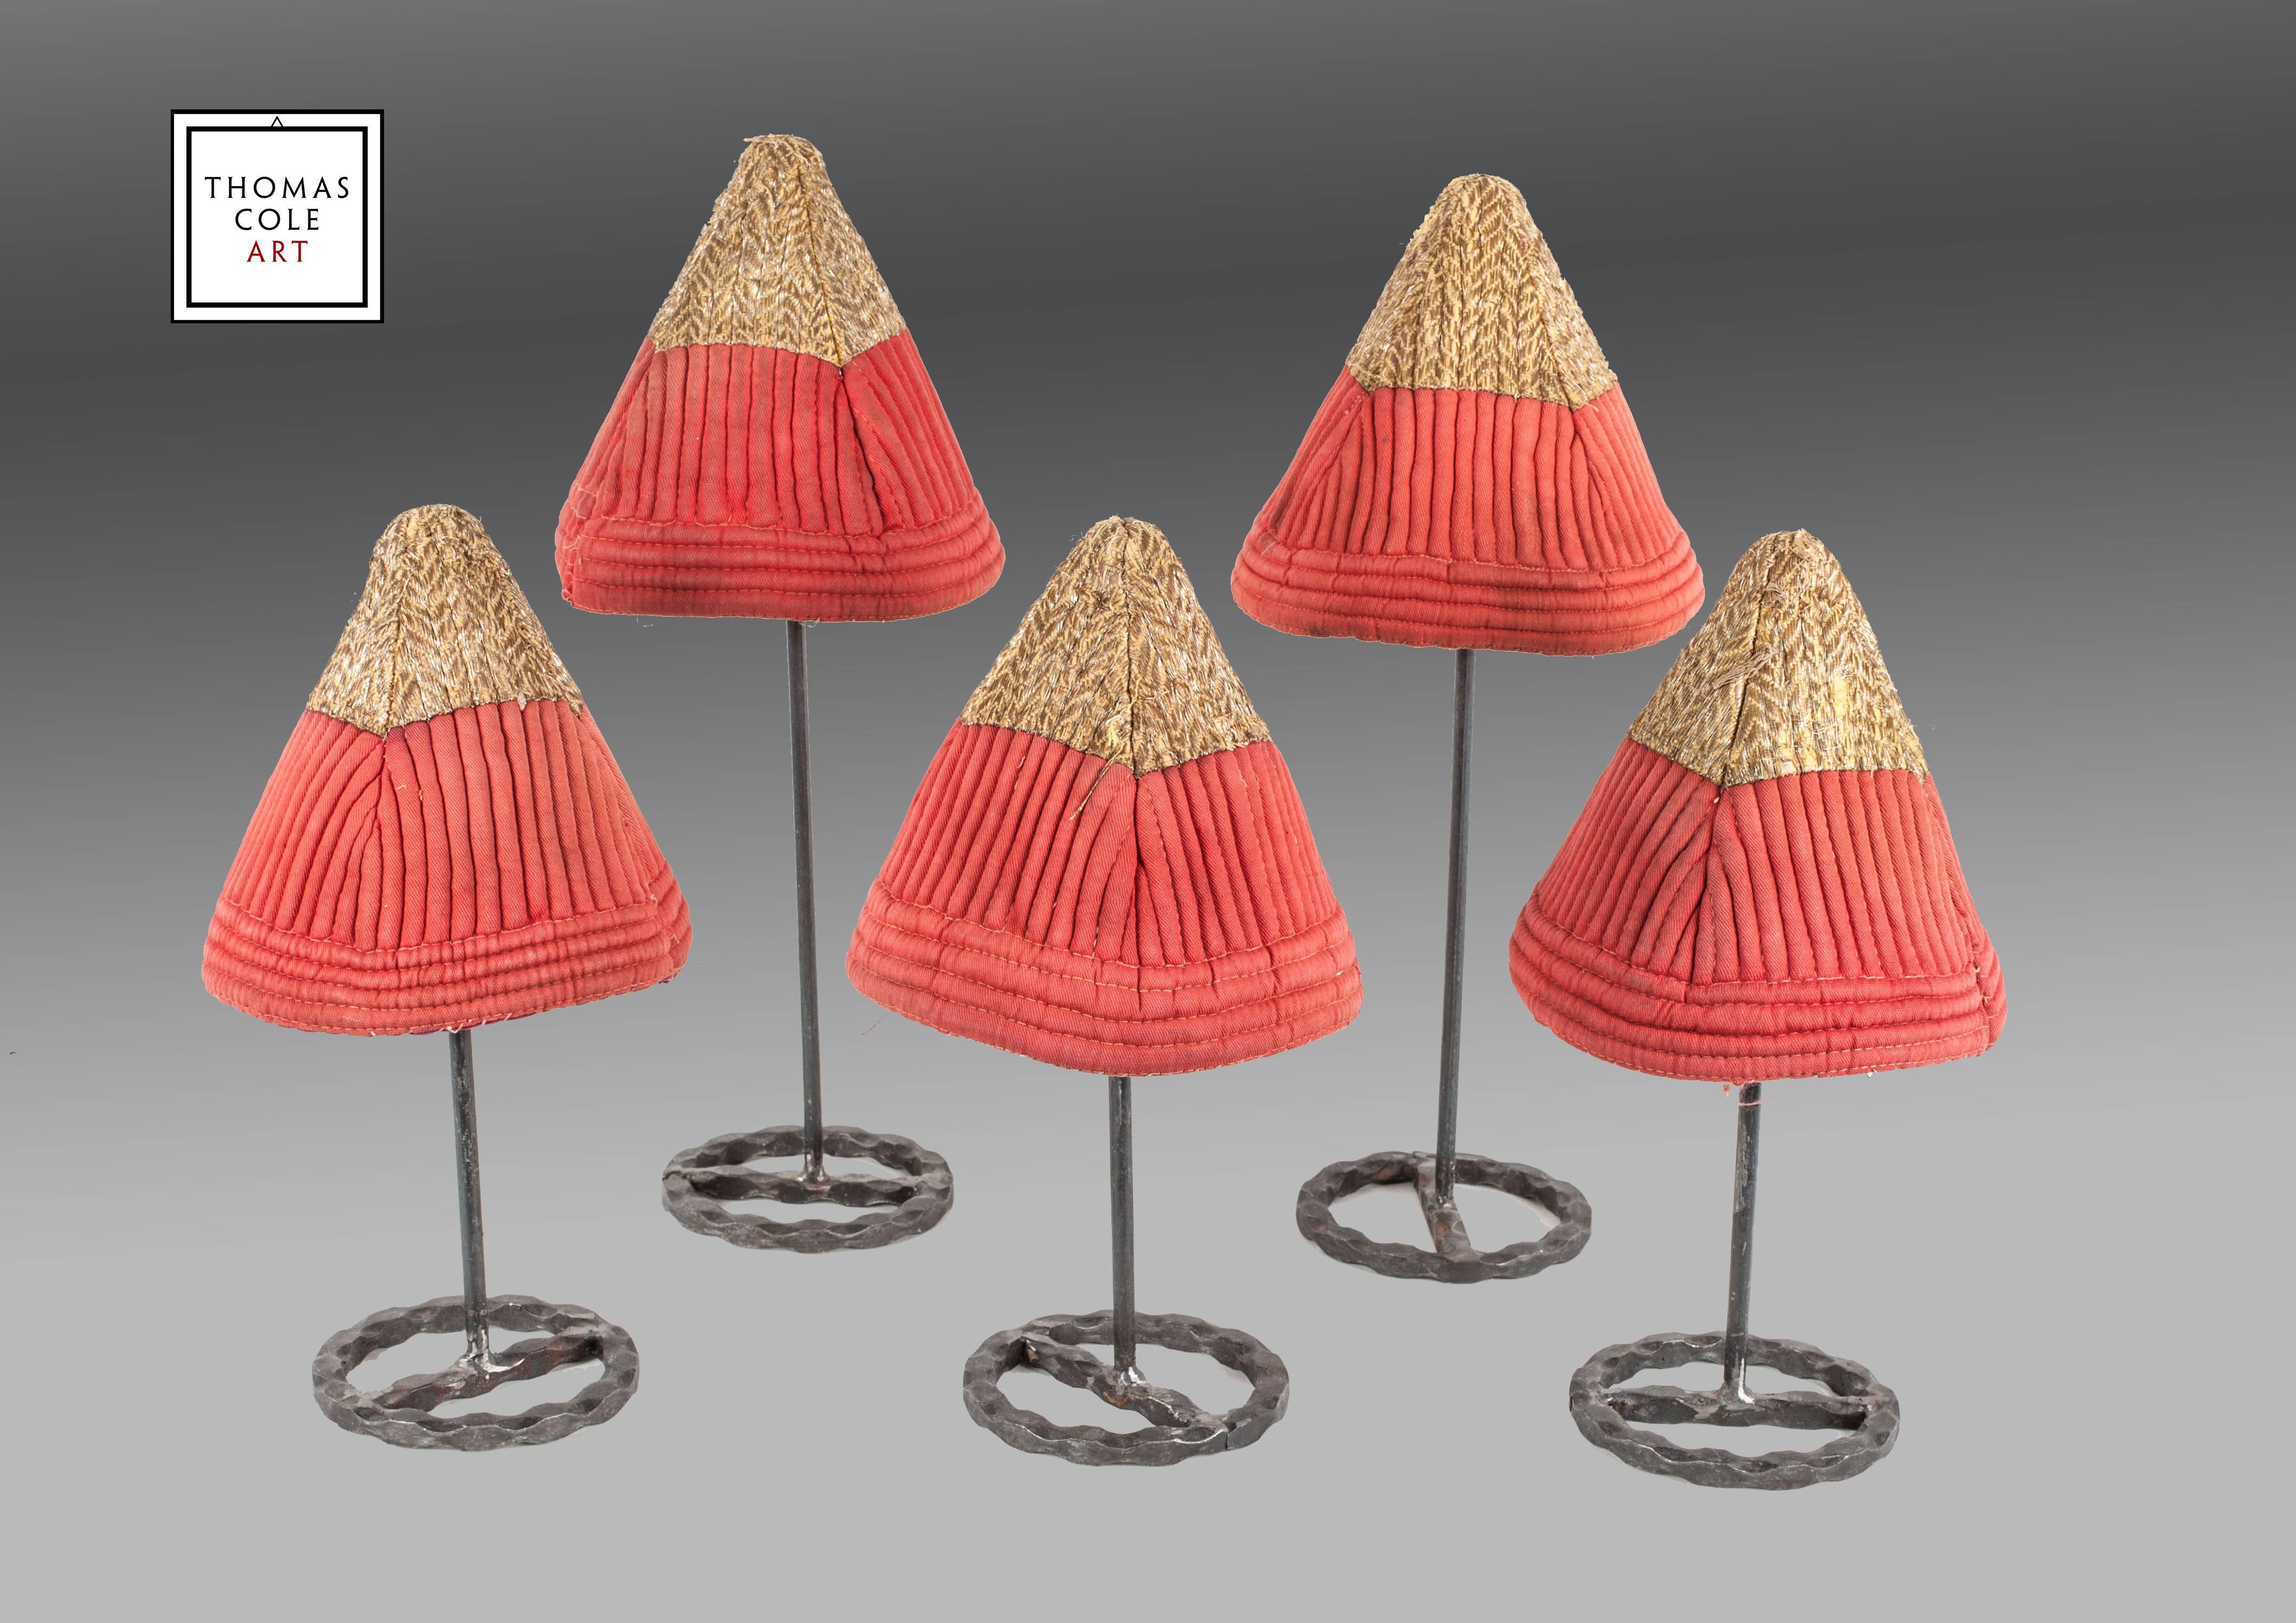 A rare and unusual group of hats from Central Asia, embroidered with a gold wrapped woolen yarn with the bottom half consisting of a red broadcloth, stitched to simulate a 'ribbing' effect.

The hats are thought to have been the property of